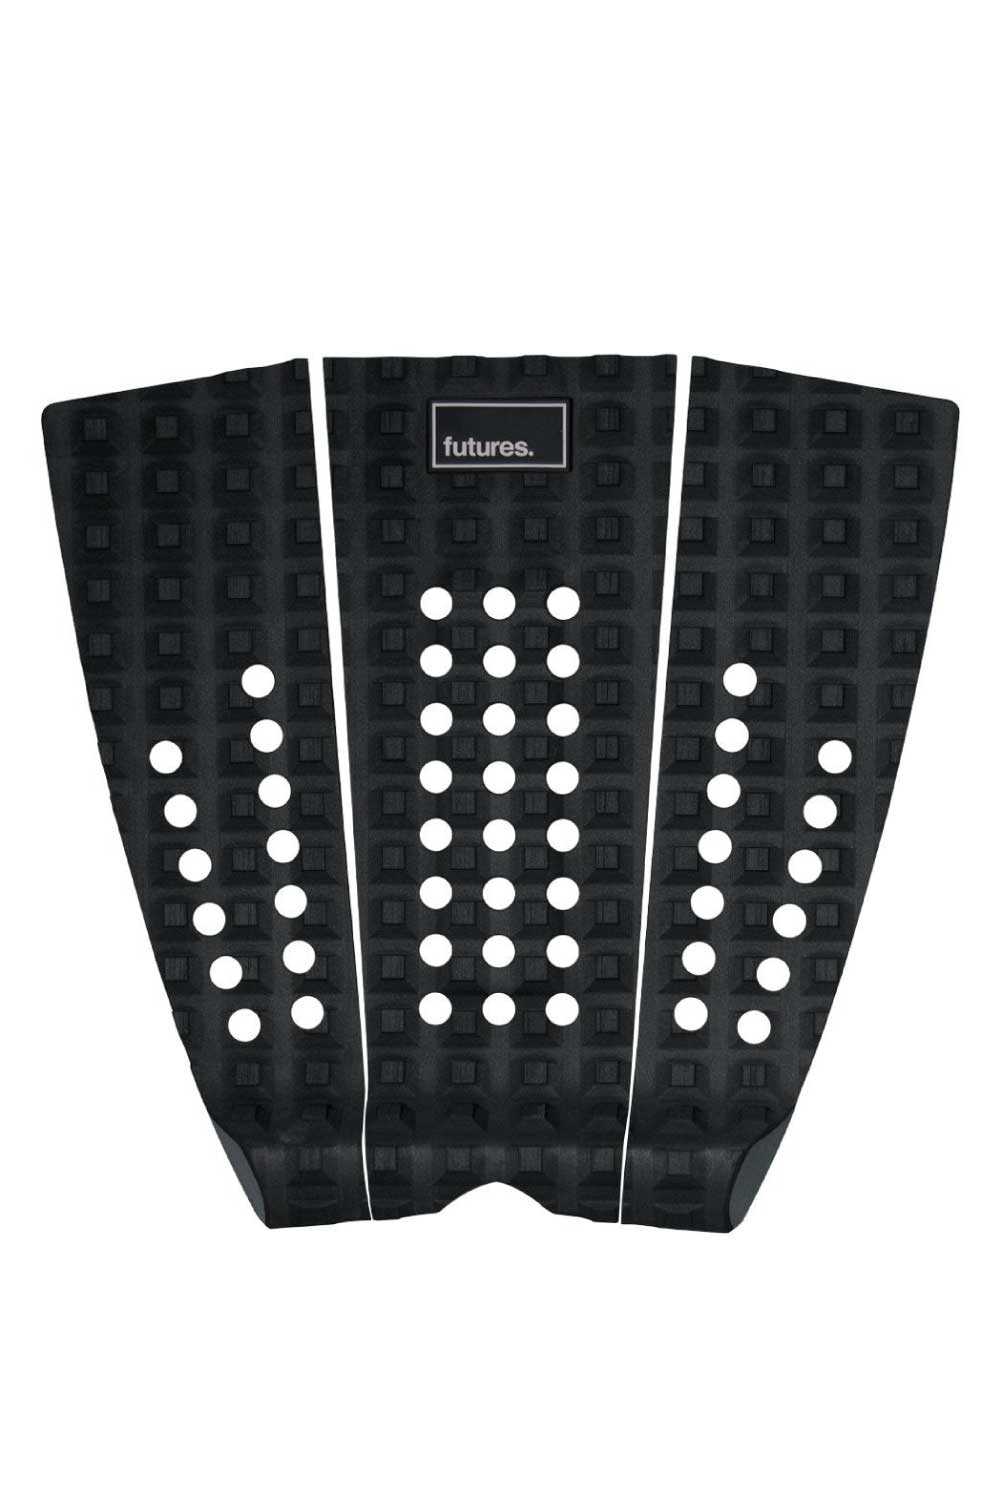 Futures F3P - Brewster Traction Pad